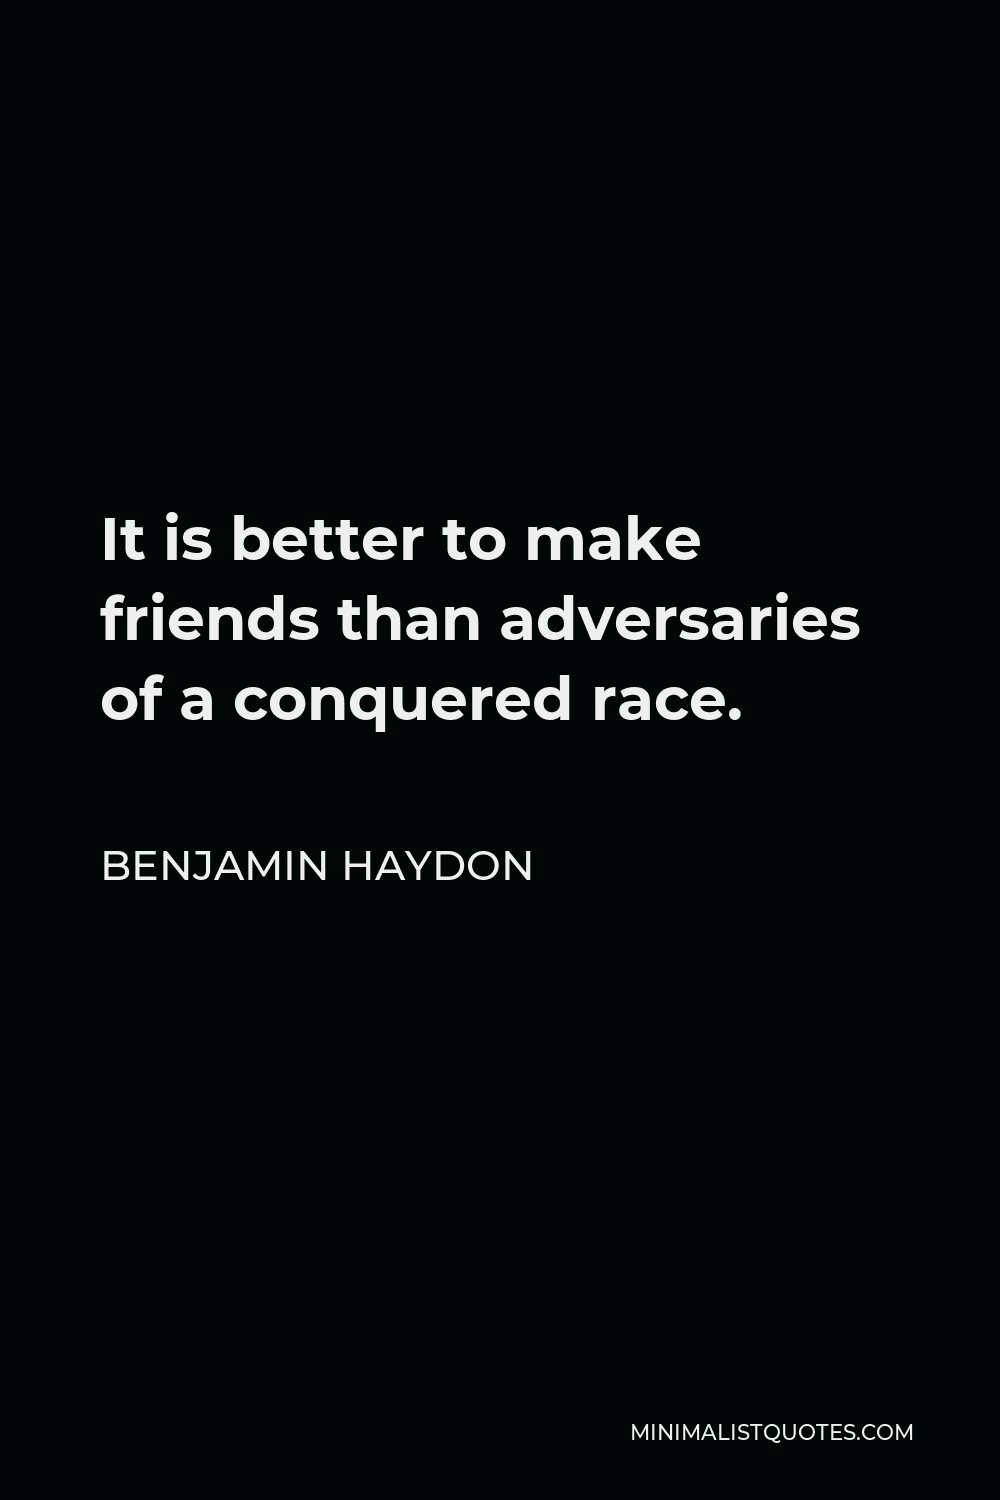 Benjamin Haydon Quote - It is better to make friends than adversaries of a conquered race.